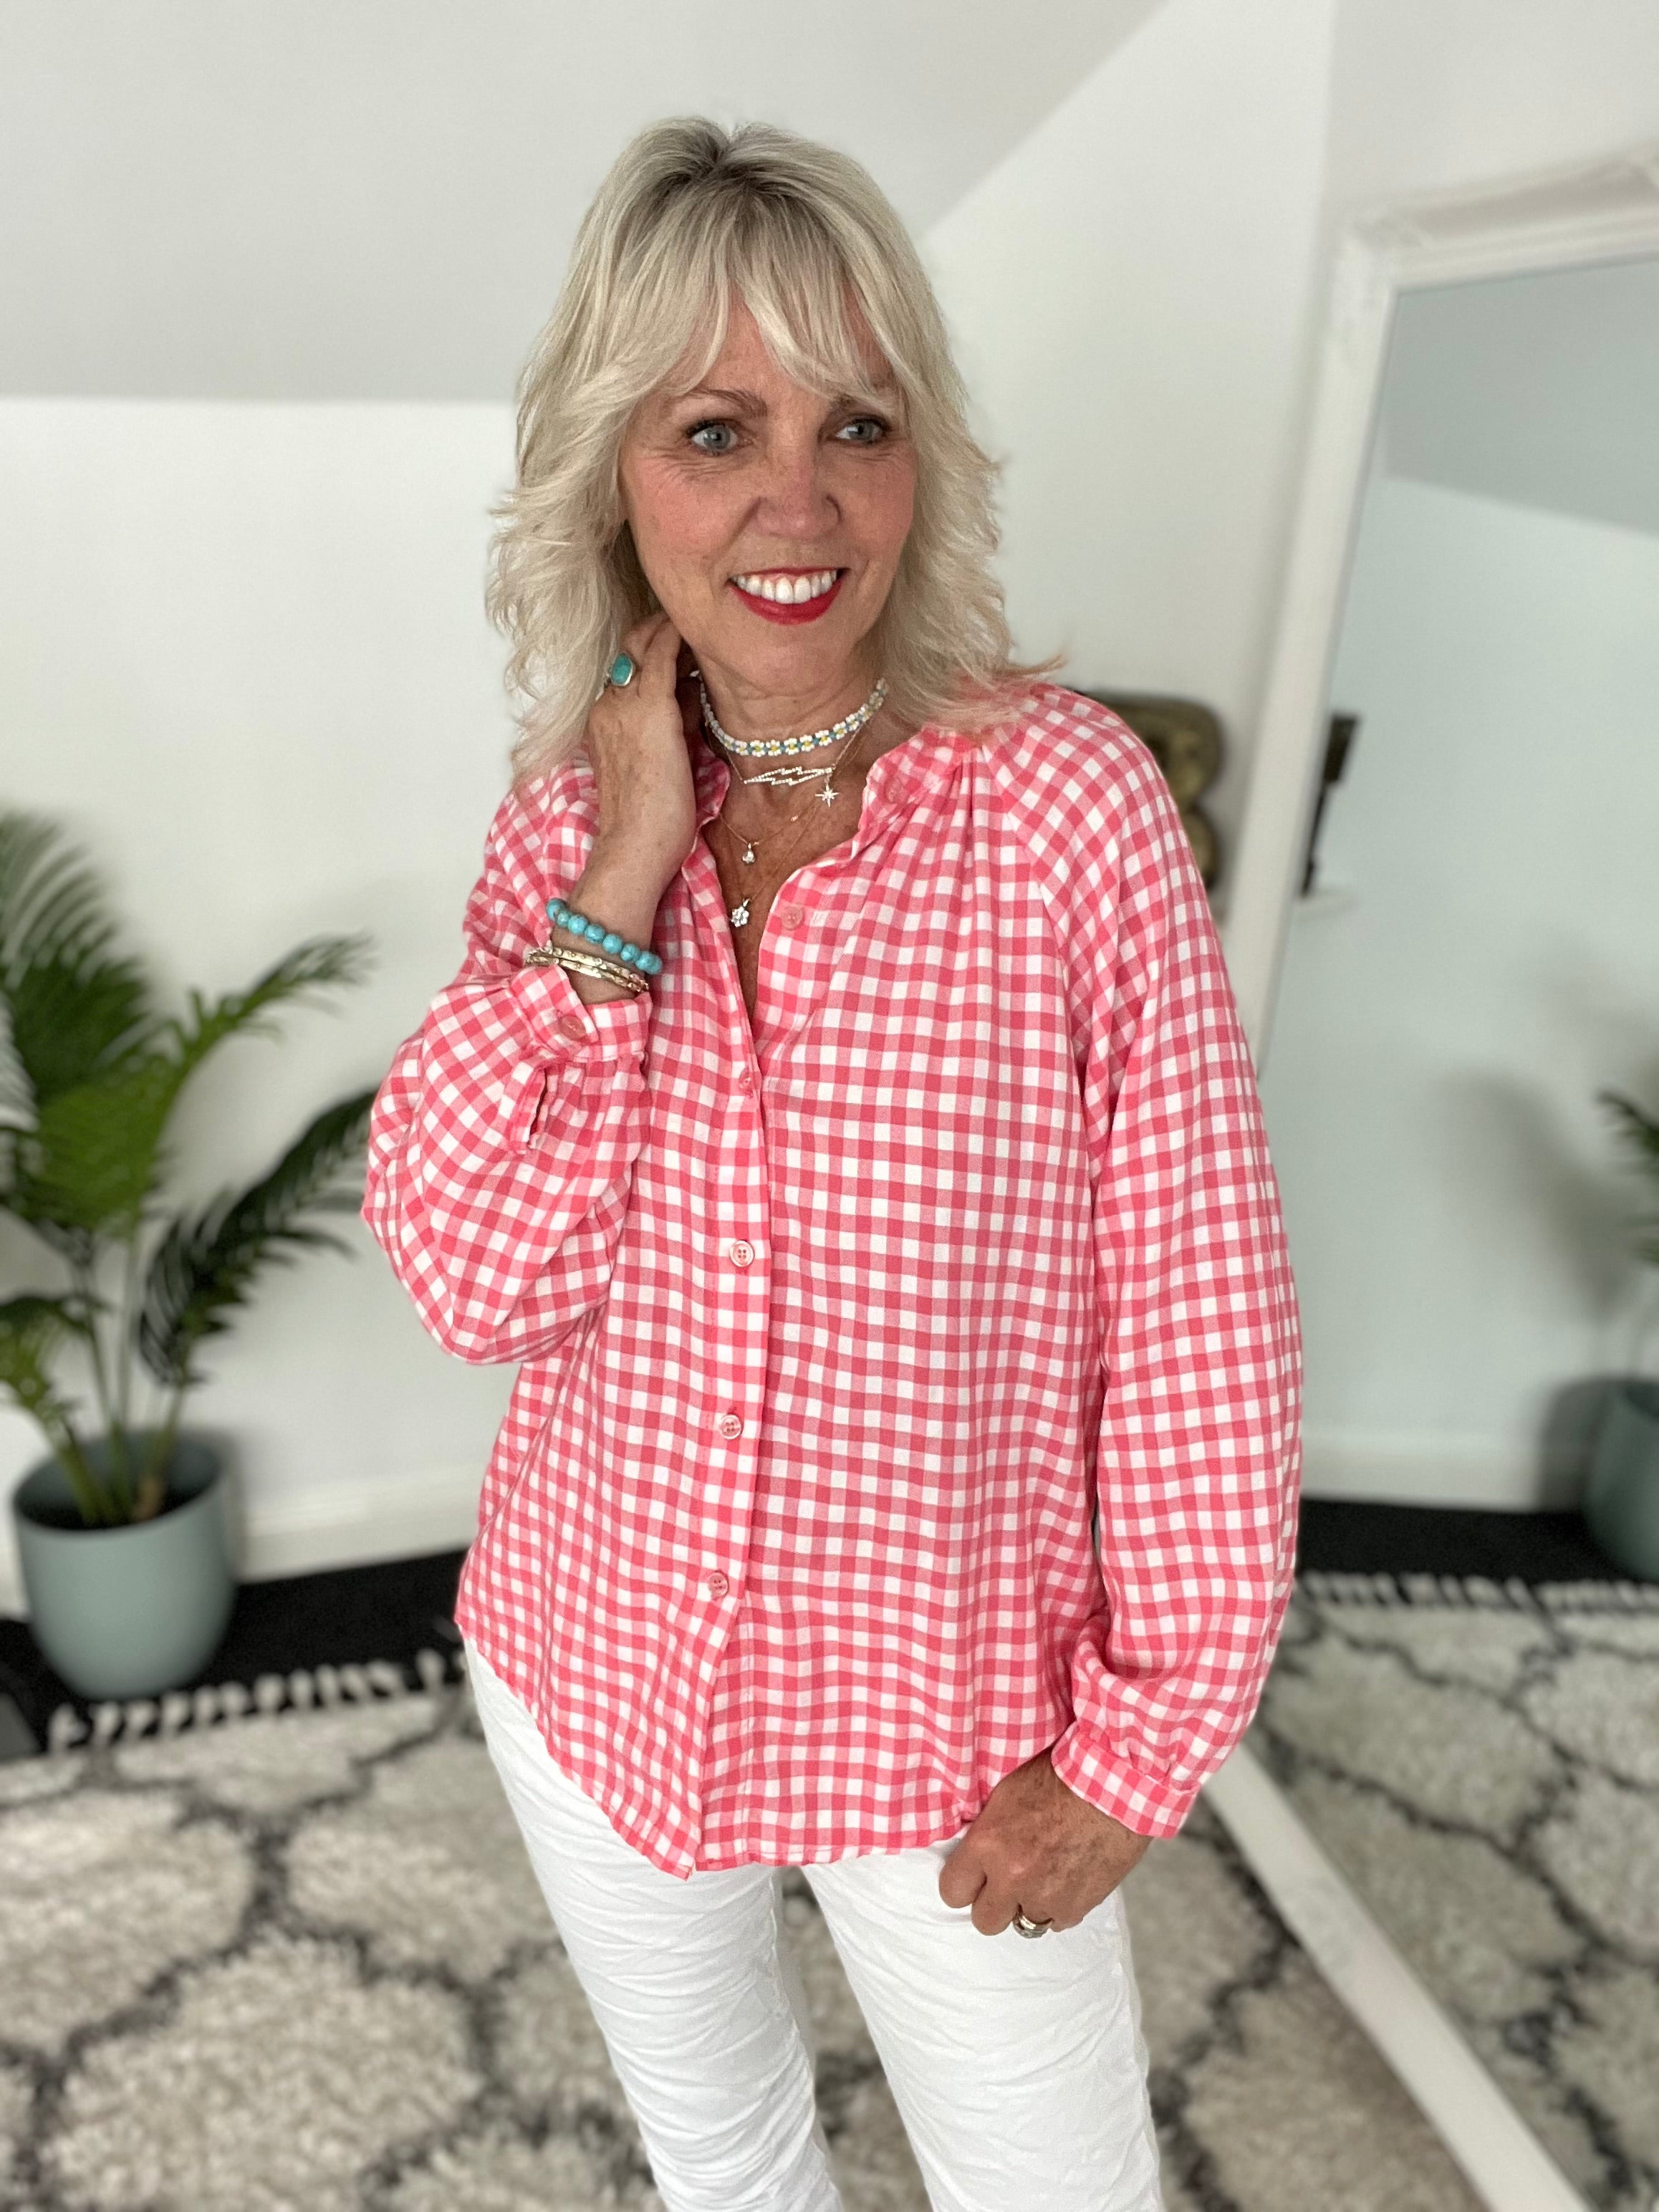 Gingham Shirt in Coral Pink & White